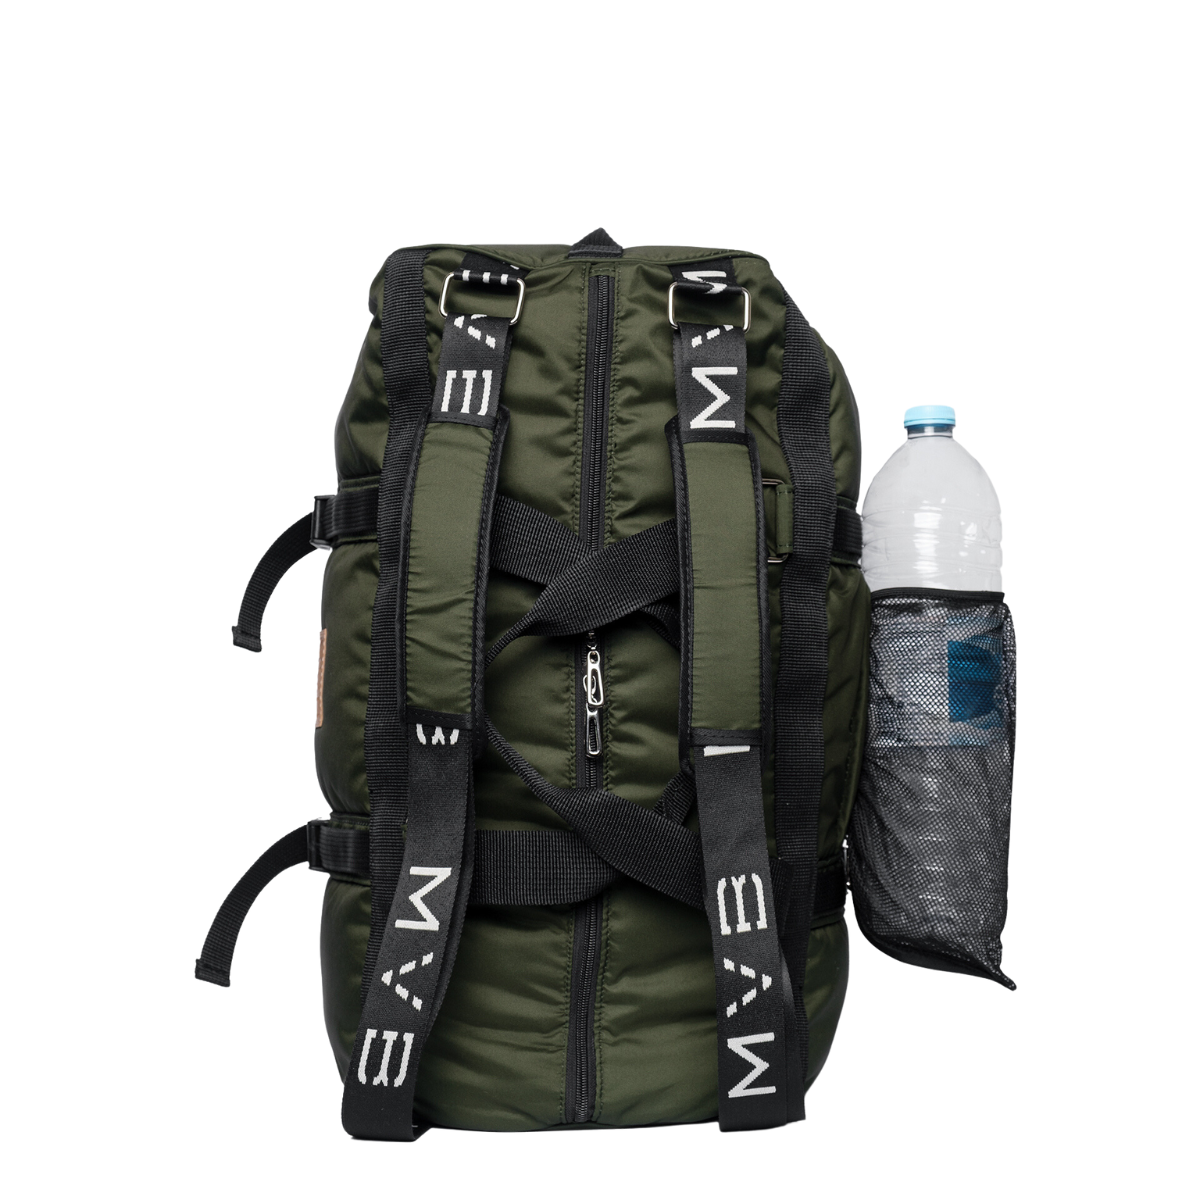 Sports vegan backpack made with ocean plastic